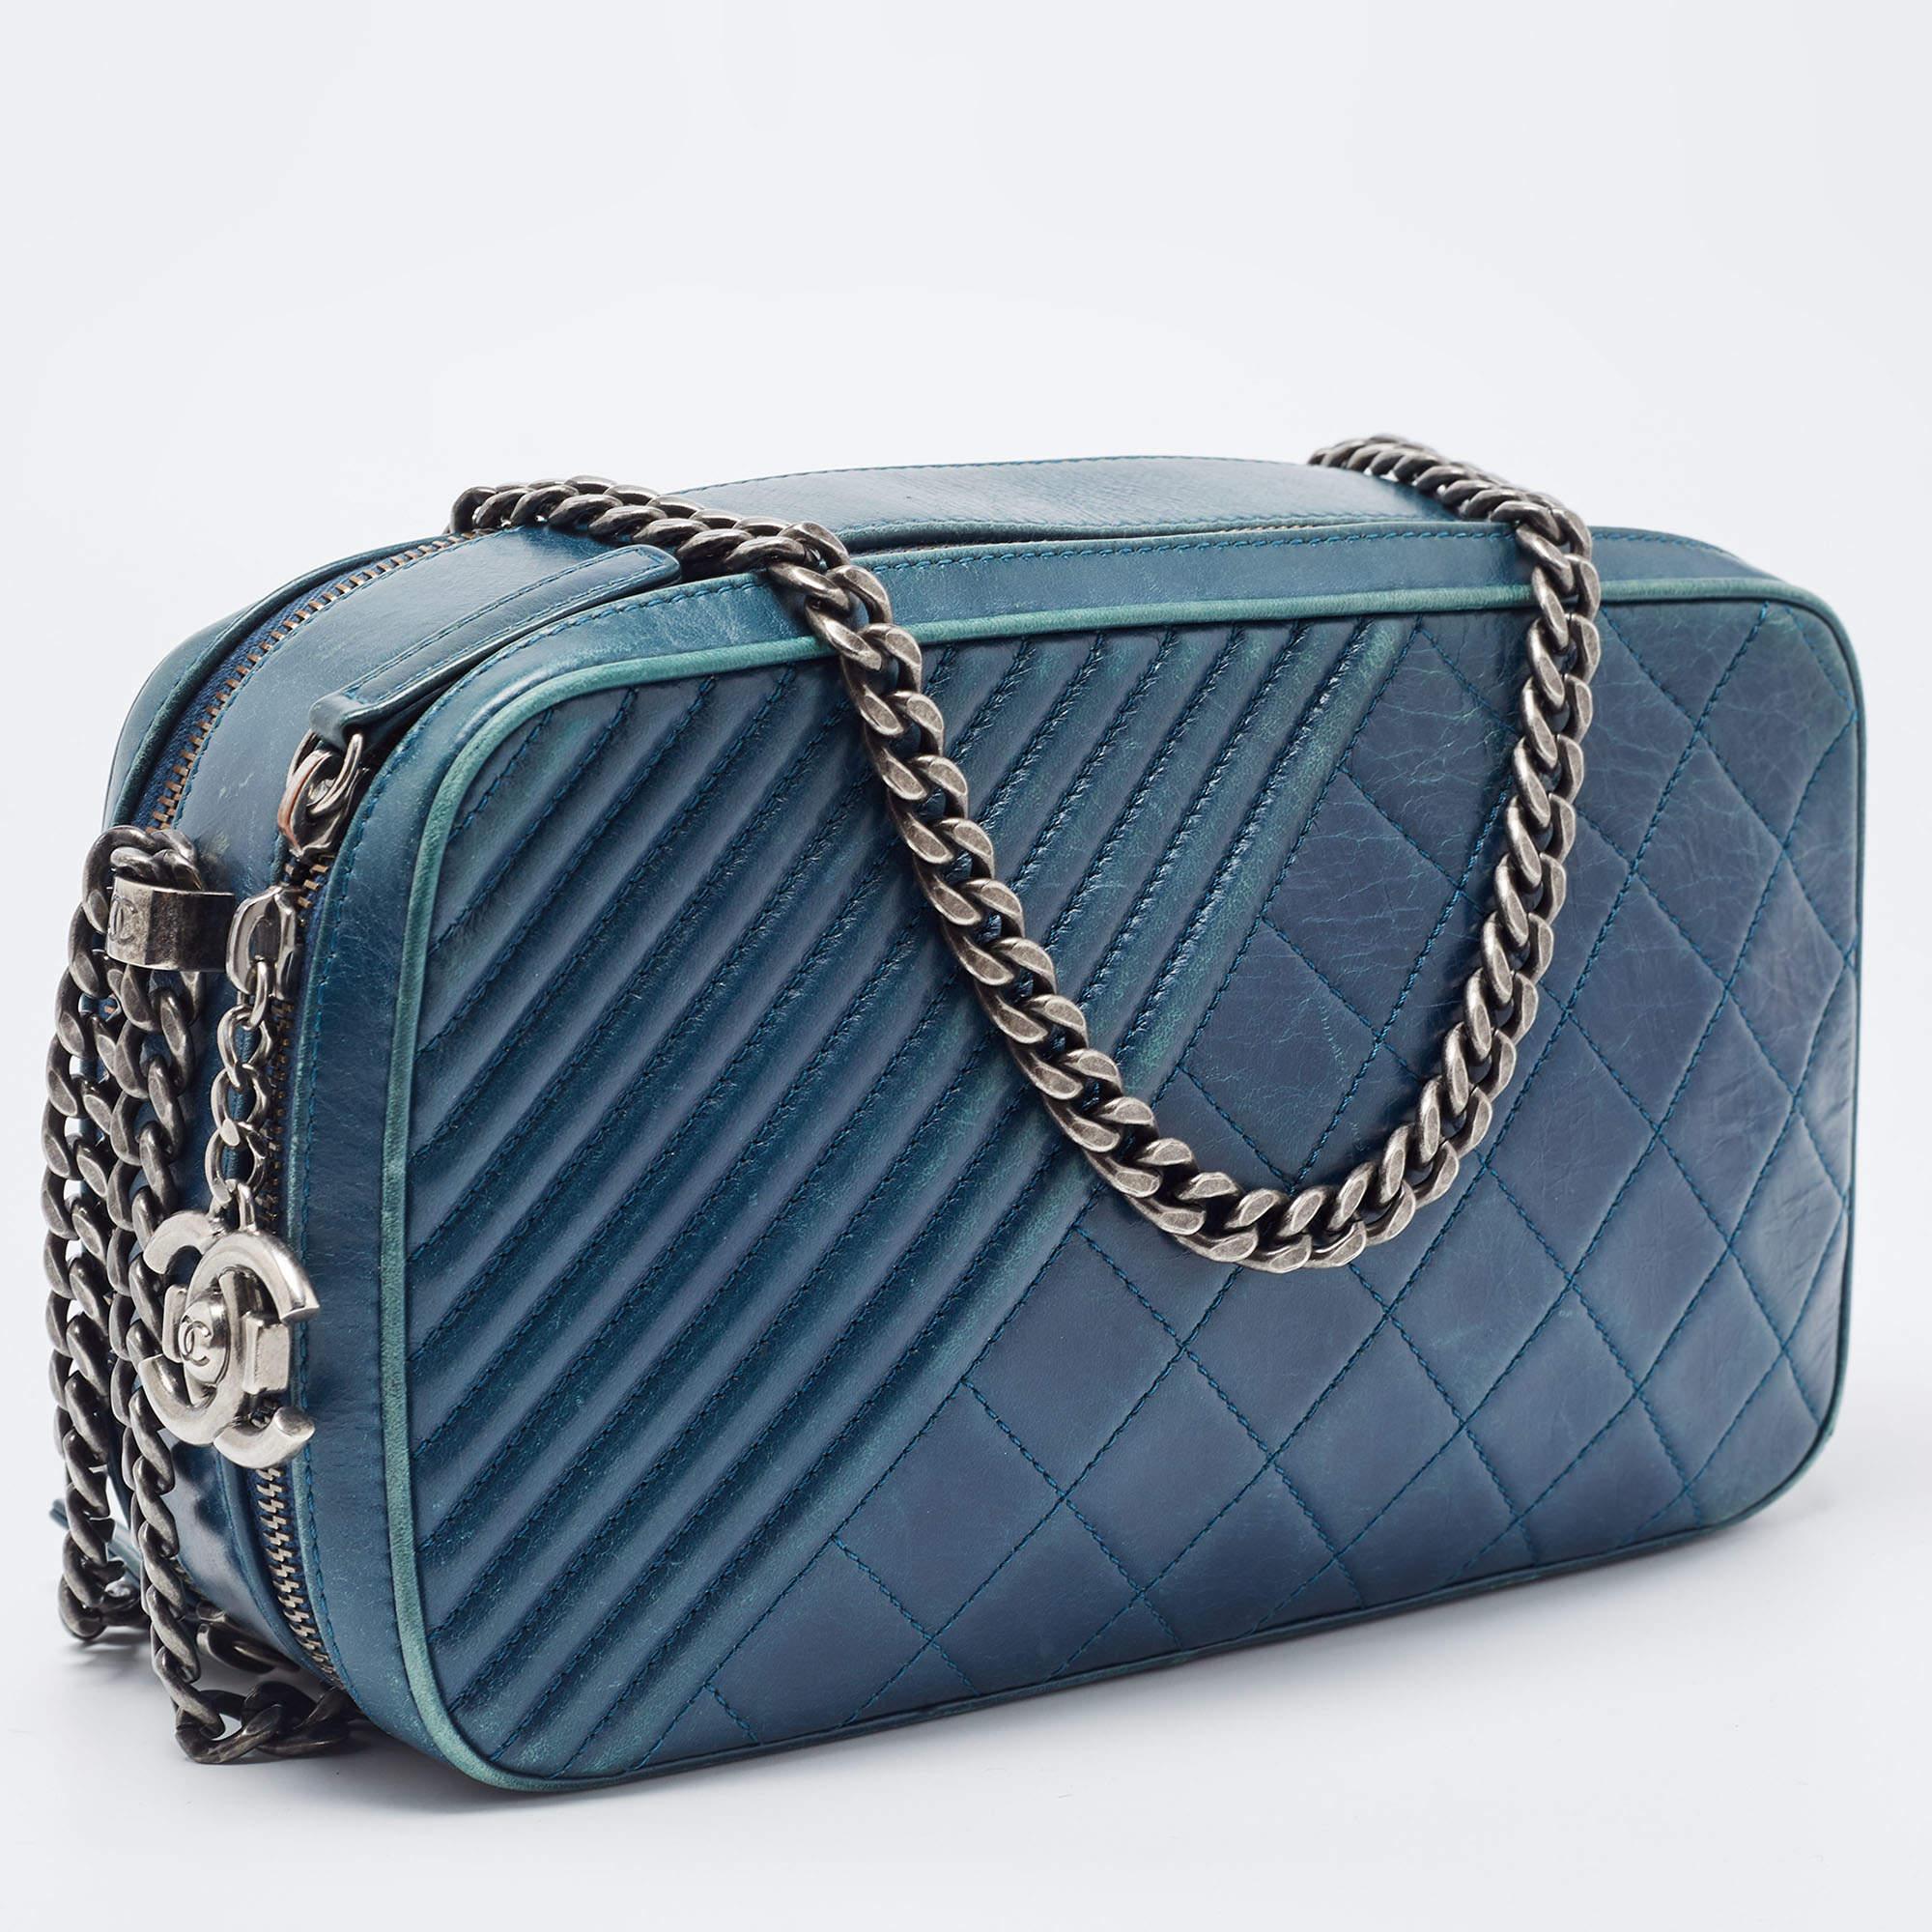 Women's Chanel Teal Blue Quilted Leather Coco Boy Camera Case Bag For Sale